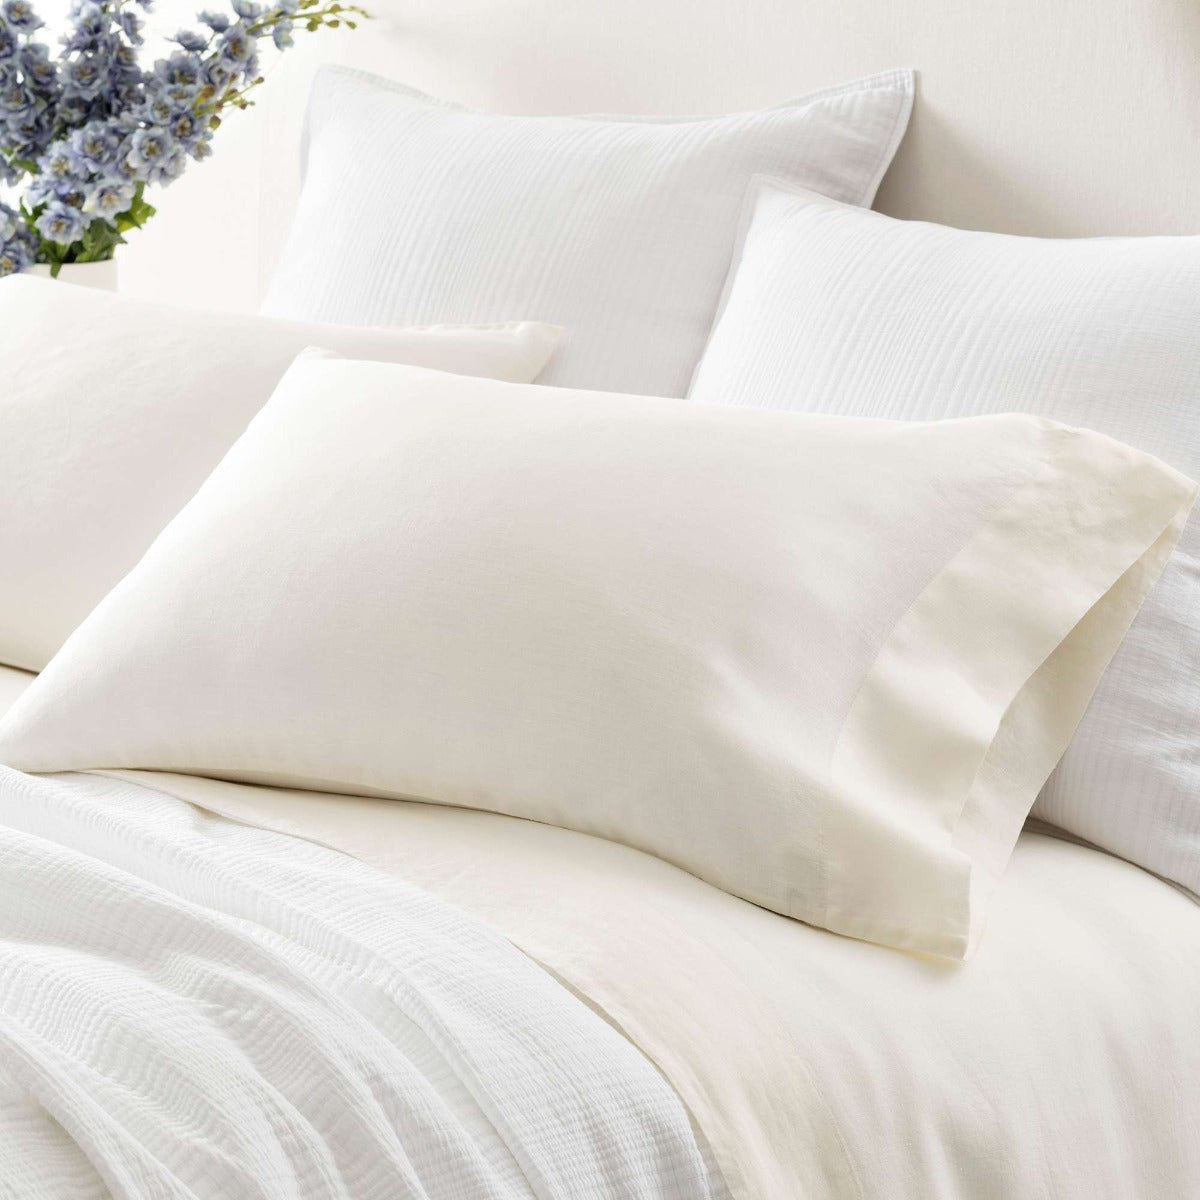 Lush Linen Ivory Pillowcases styled with white bedding. Styled view.